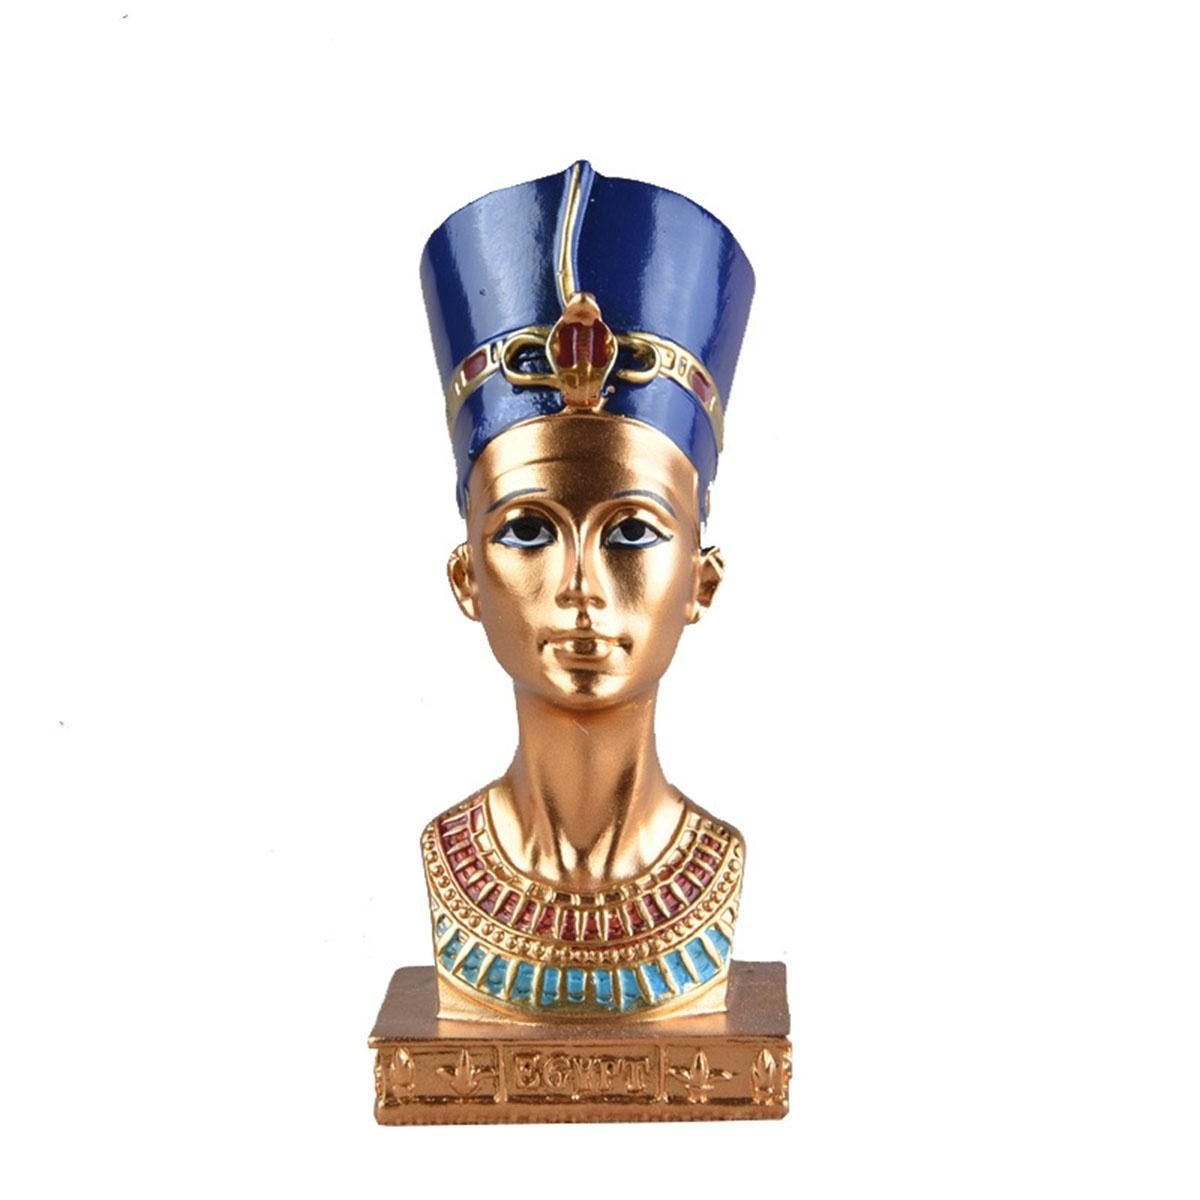 

Handicraft Ancient Resin Egyptian Cleopatra Pharaoh Figurine Statue Sculpture Home Office Decorations